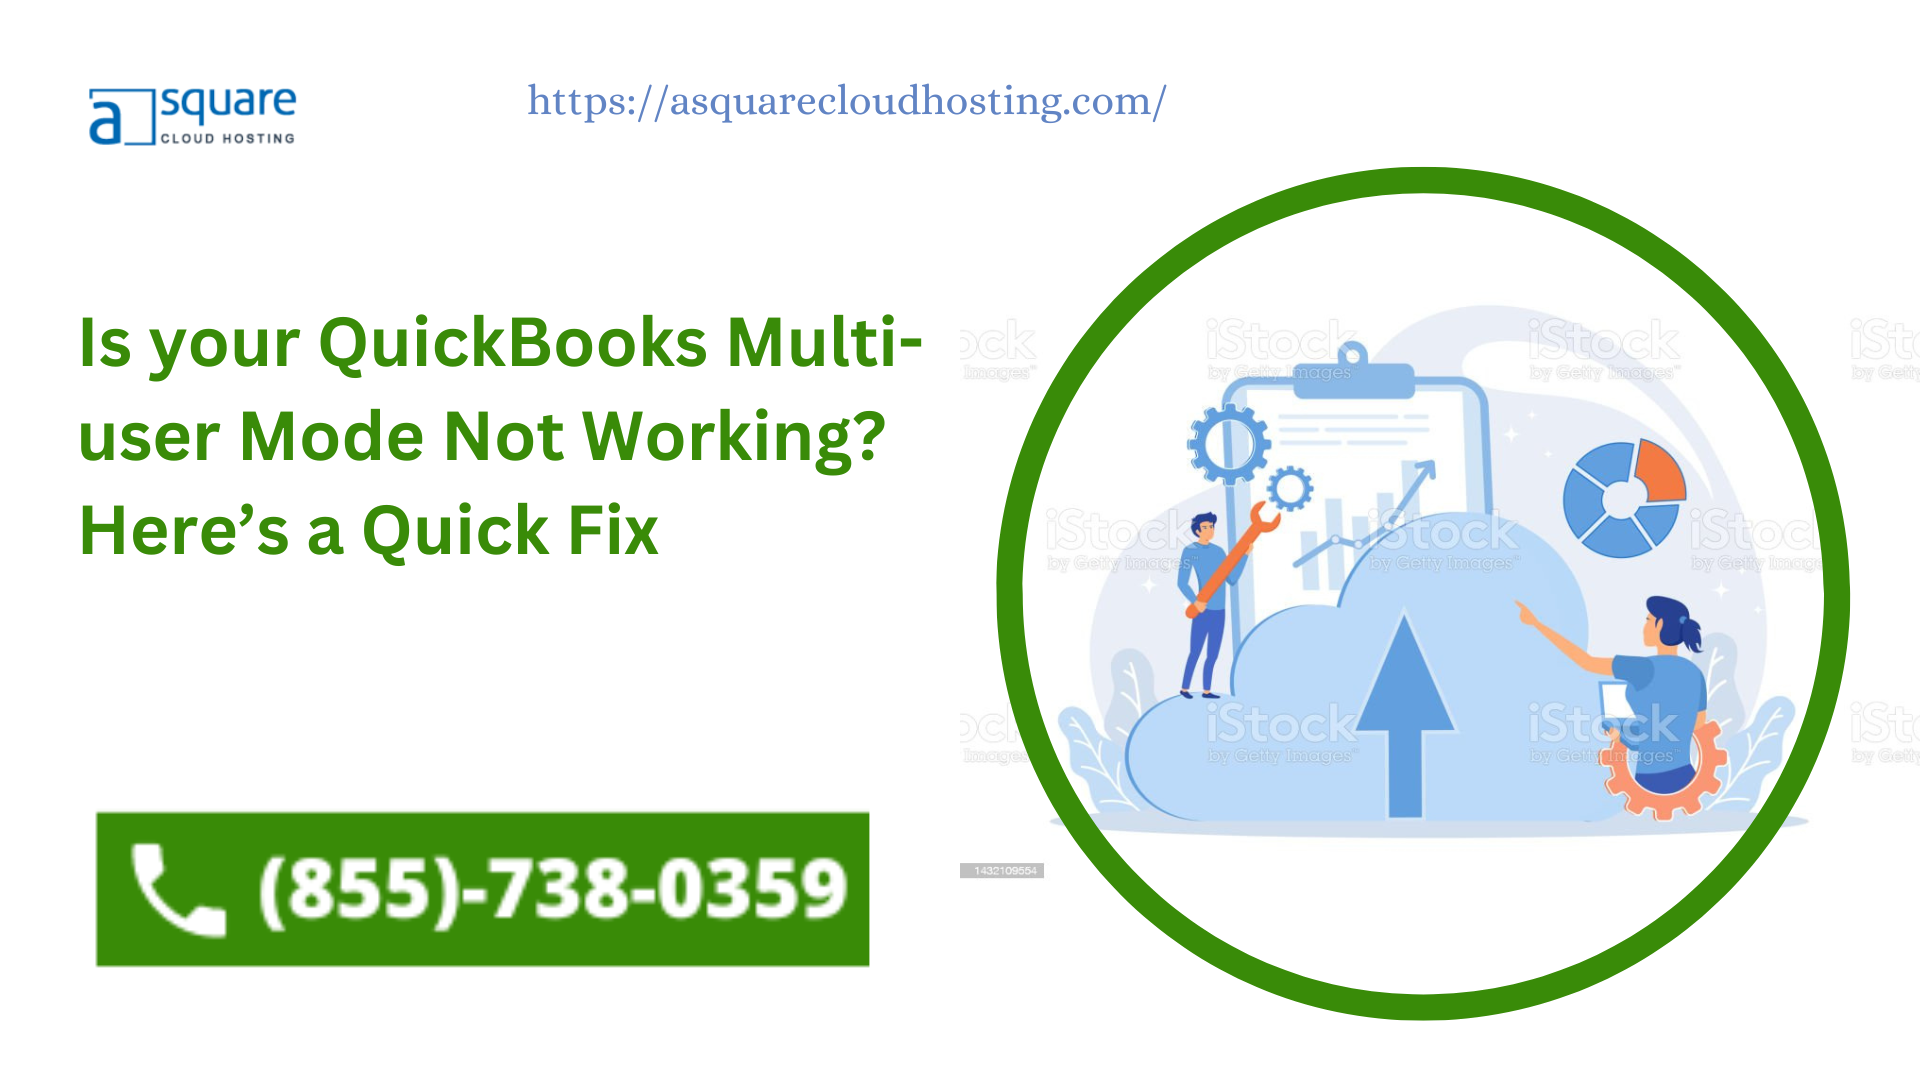 Is your QuickBooks Multi-user Mode Not Working? Here’s a Quick Fix